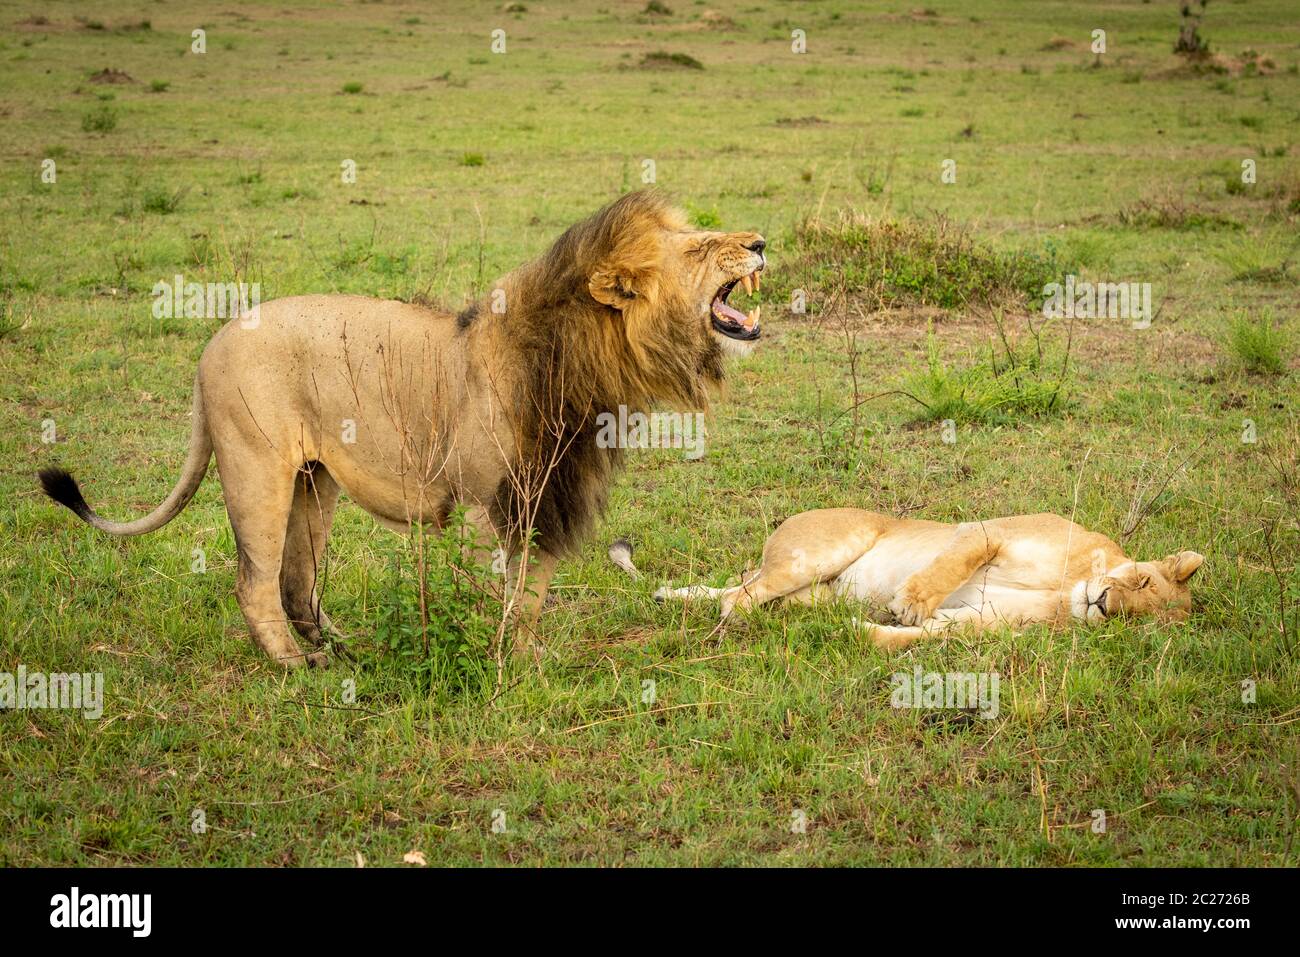 Male lion stands over lioness baring teeth Stock Photo